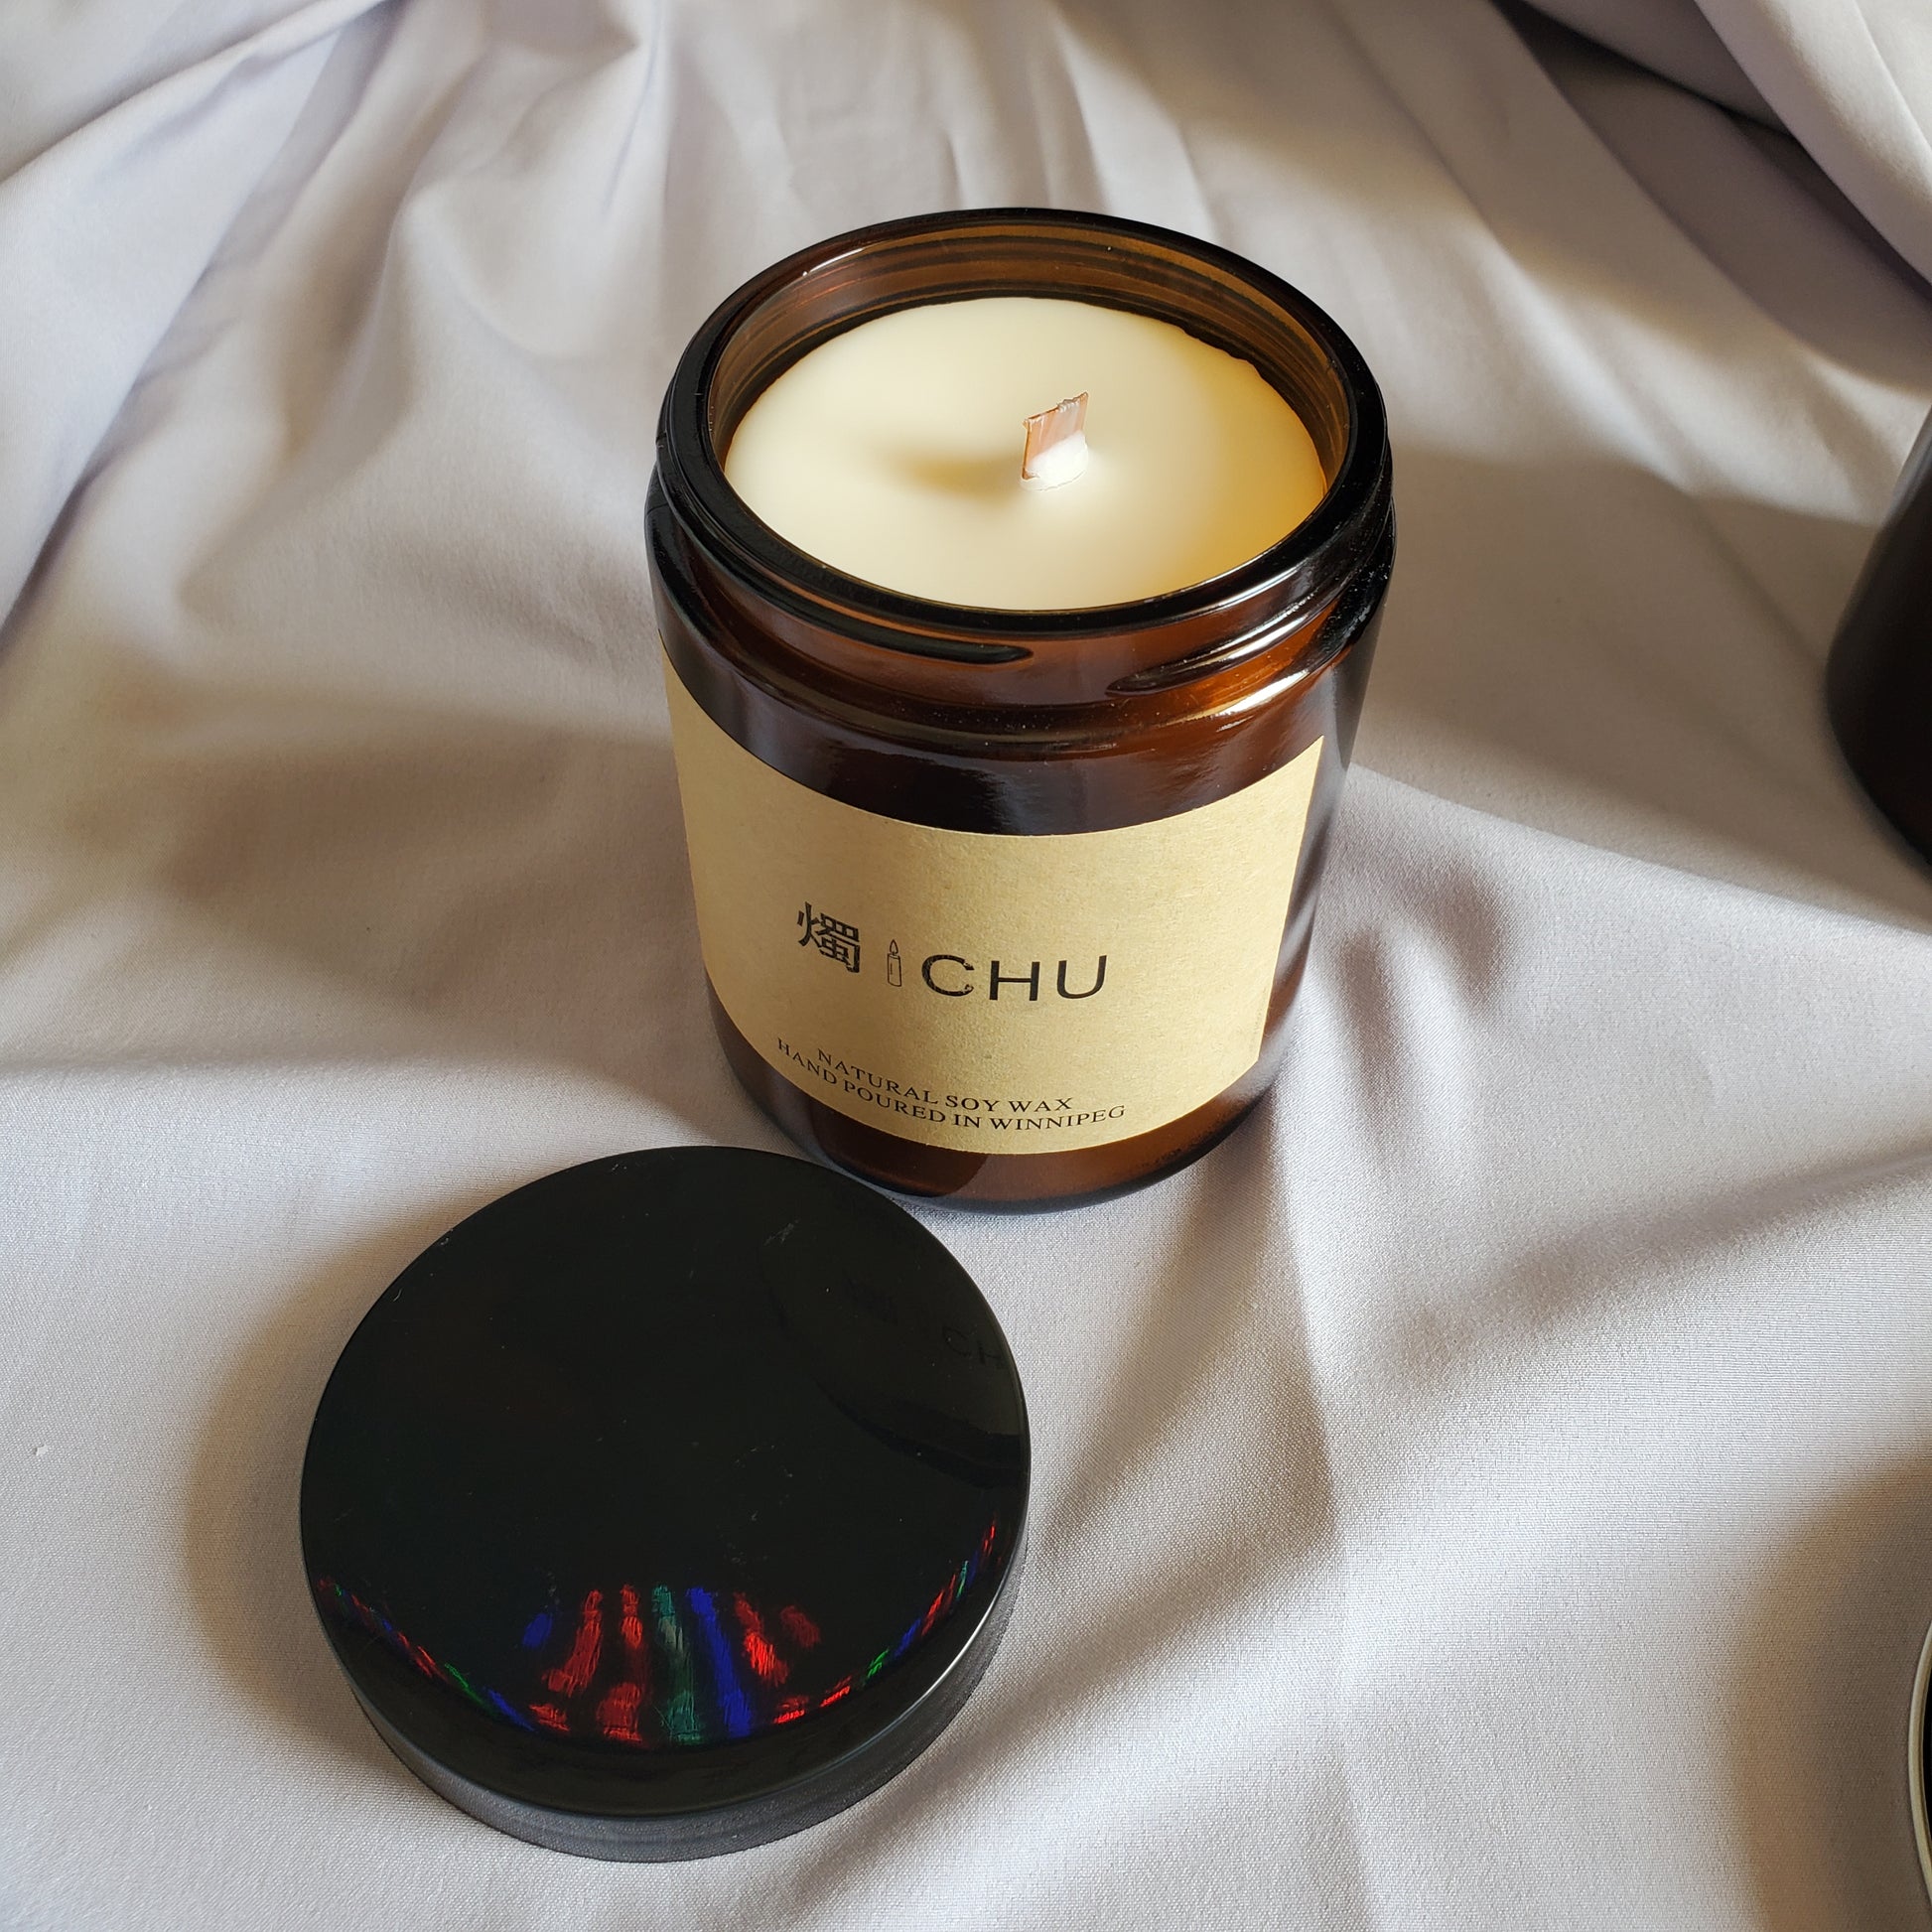 Chu, wood wick candle - the best wishes